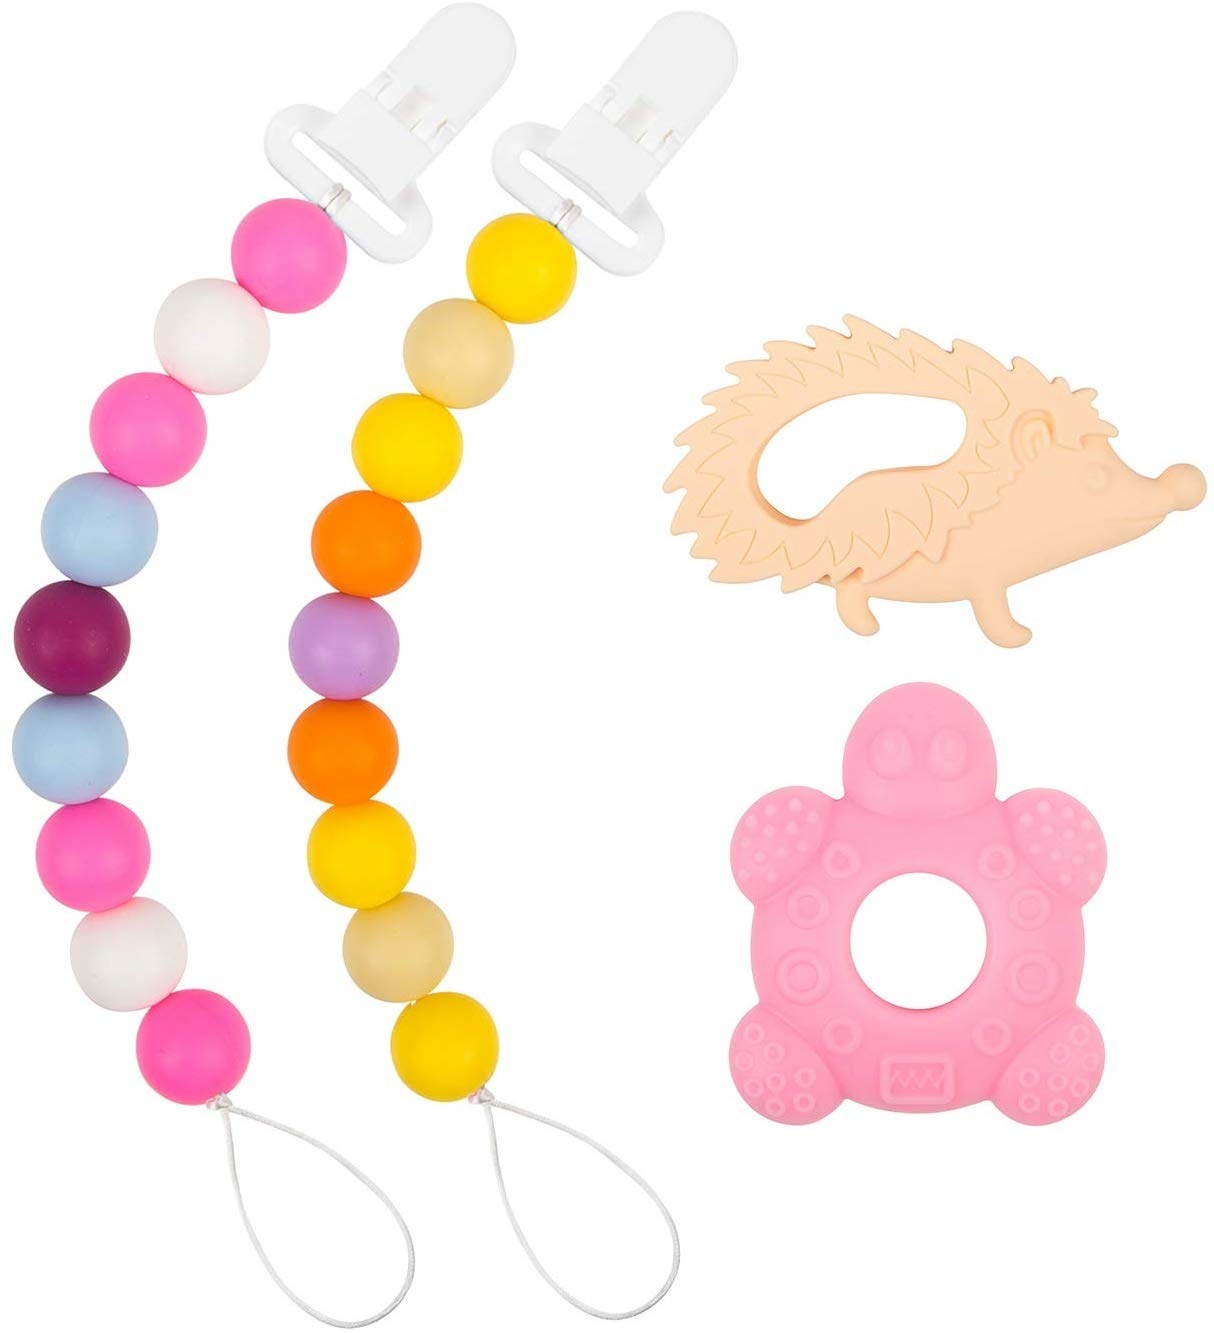 A pacifier clip with a string of silicone beads attached to it Two silicone animal-shaped teethers are next to it